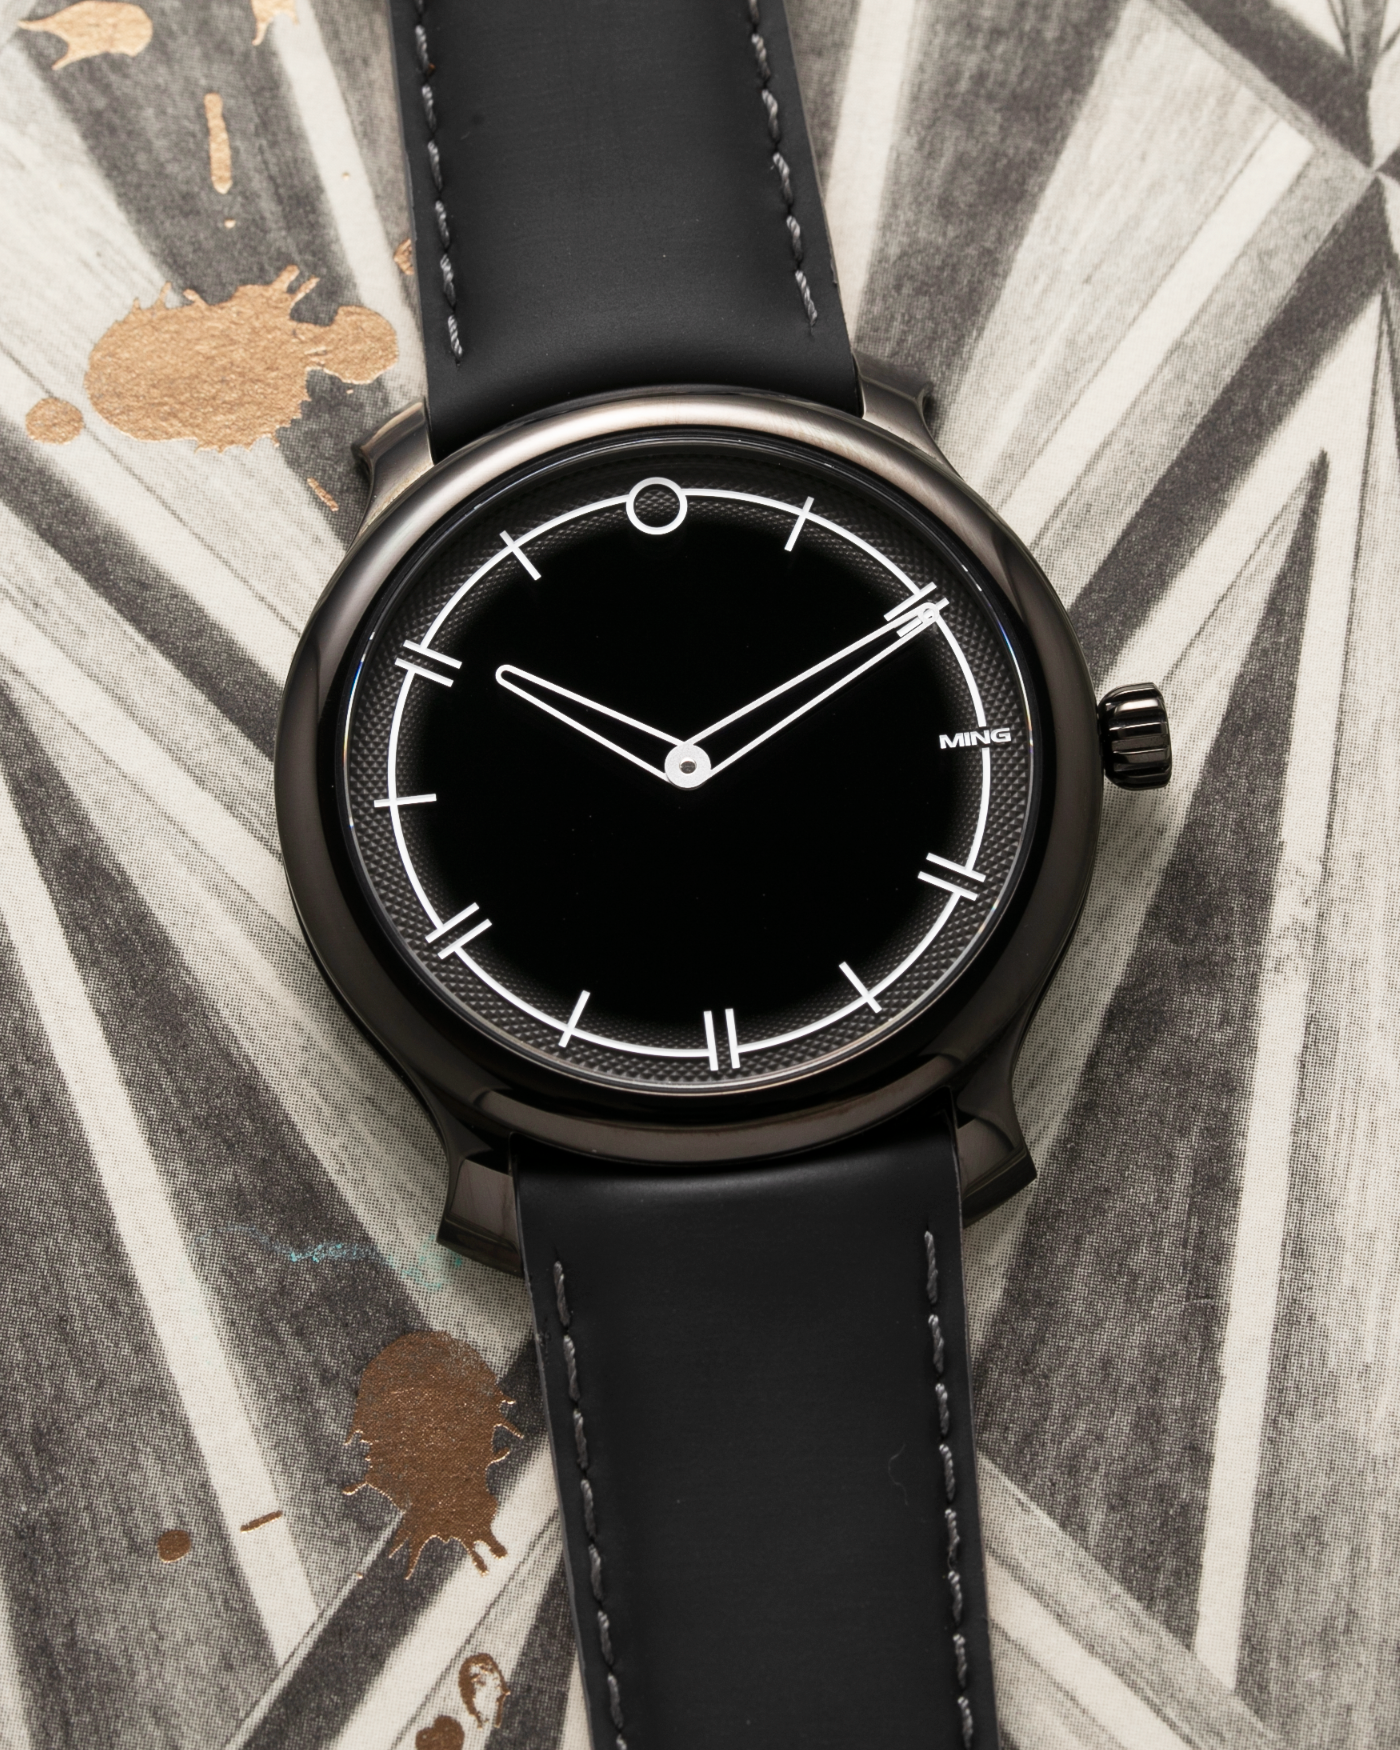 Brand: Ming Year: 2021 Model: 27.02 SPC Friends and Family Material: DLC Coated Stainless Steel Movement: Heavily modified ETA Peseux 7001 Case Diameter: 38mm Strap: Jean Rousseau Black Leather for MING